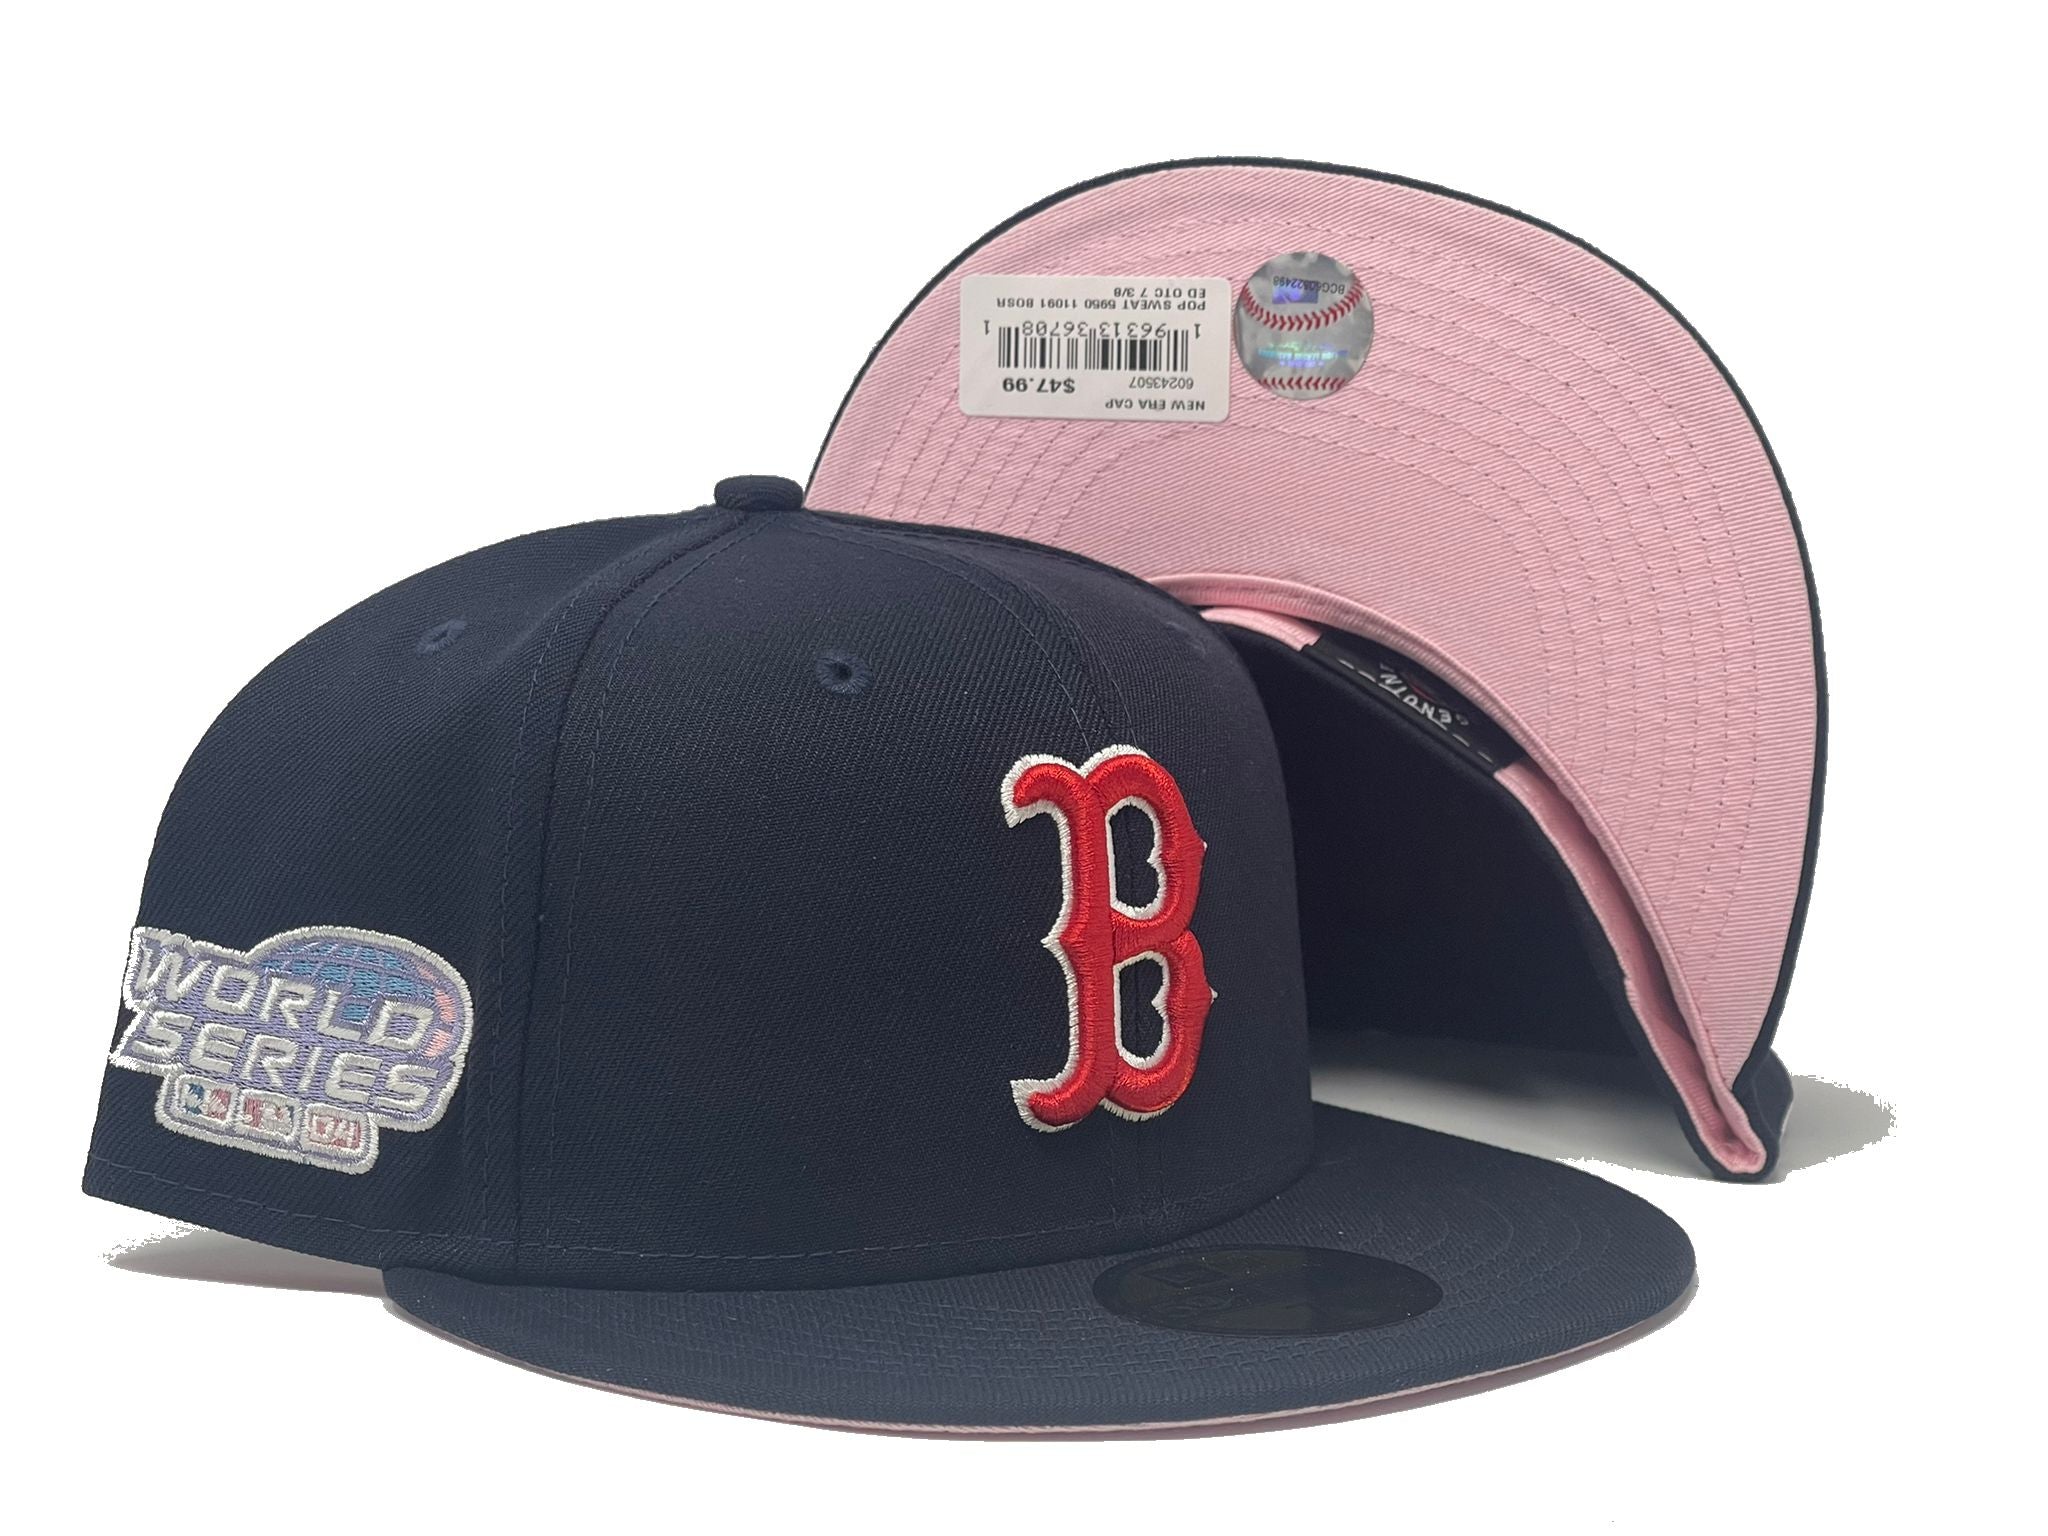 Boston Red Sox 2004 World Series Champion New Era 59FIFTY Fitted Hat (Scarlet Red Black Green Under BRIM) 7 3/8